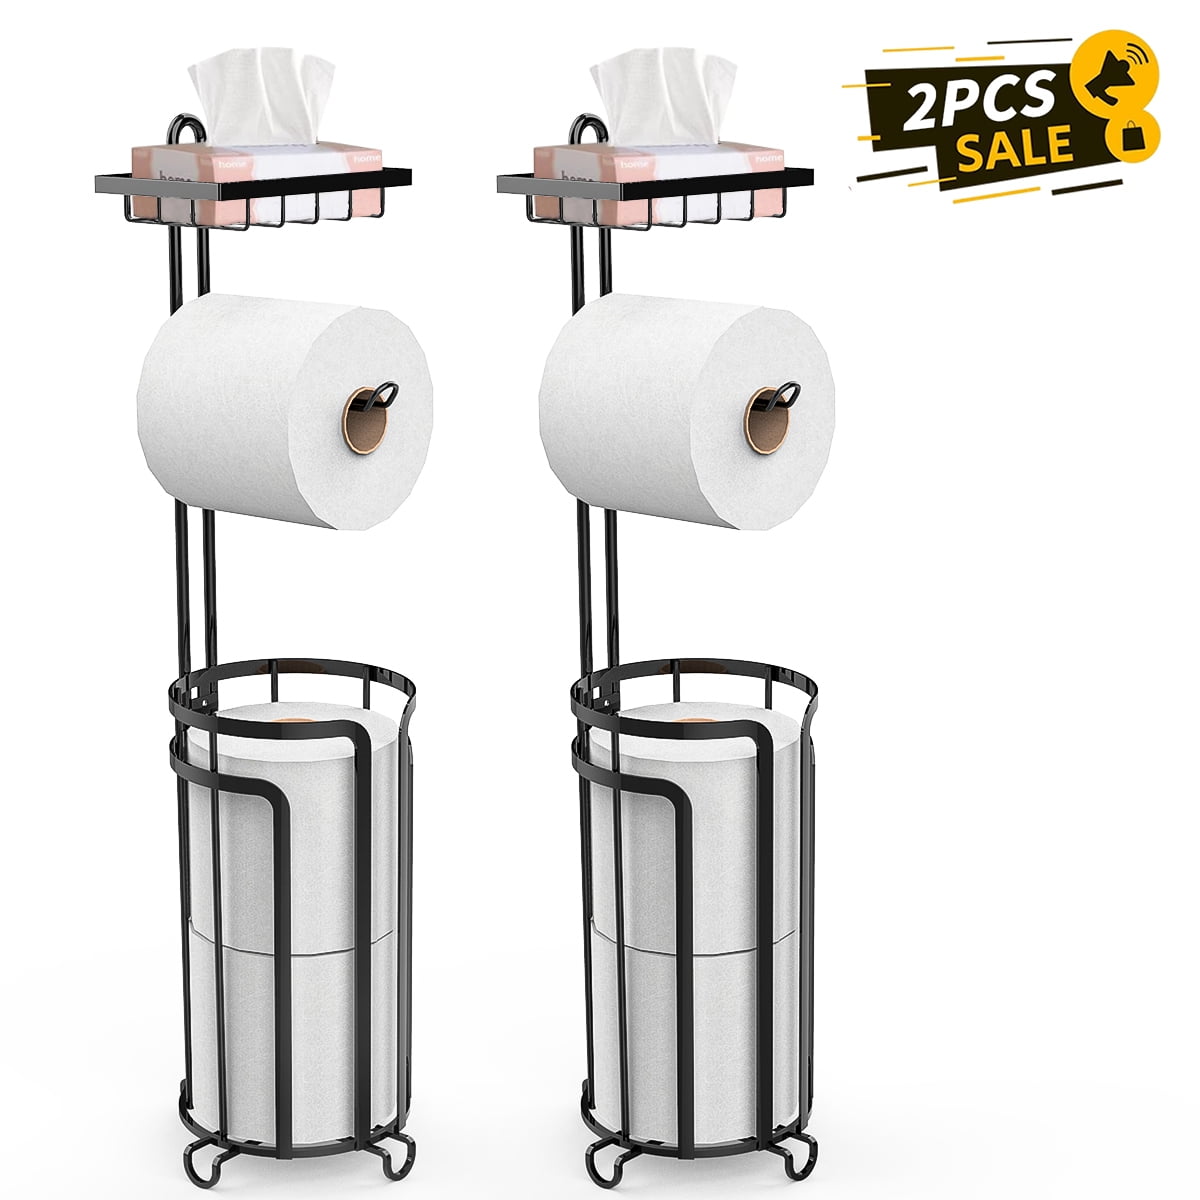 2 Pack Free Standing Toilet Paper Holder Stand, Toilet Tissue Paper Roll  Storage Holder with Shelf and Reserve for Bathroom Storage Holds Wipe,  Mobile Phone, Mega Rolls, Black